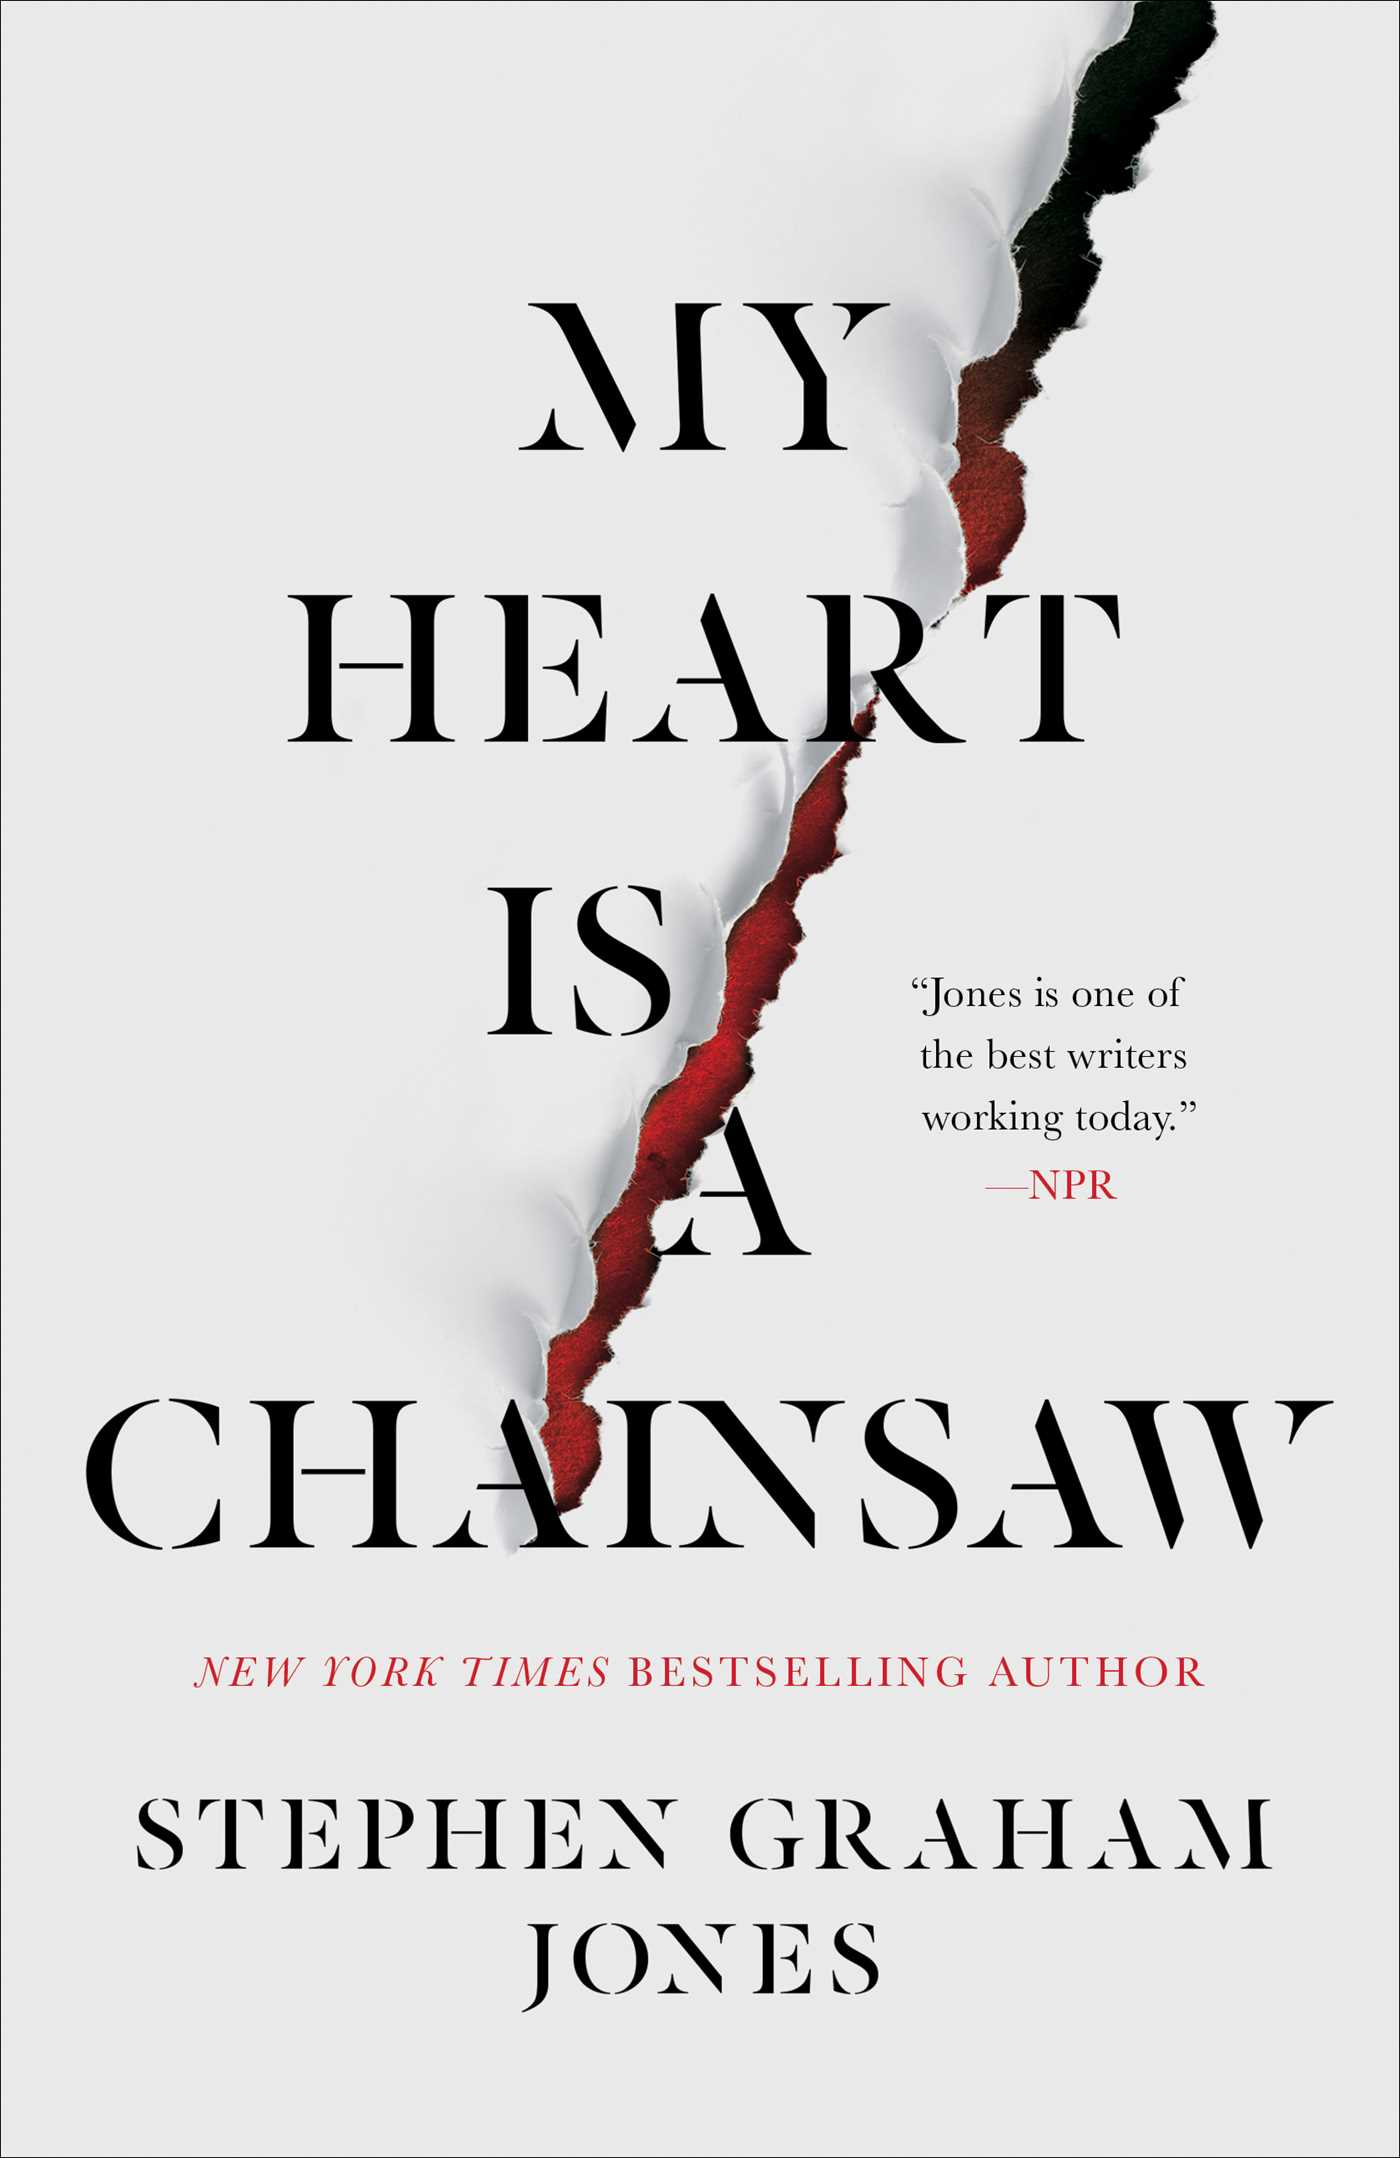 [EPUB] The Indian Lake Trilogy #1 My Heart Is a Chainsaw by Stephen Graham Jones